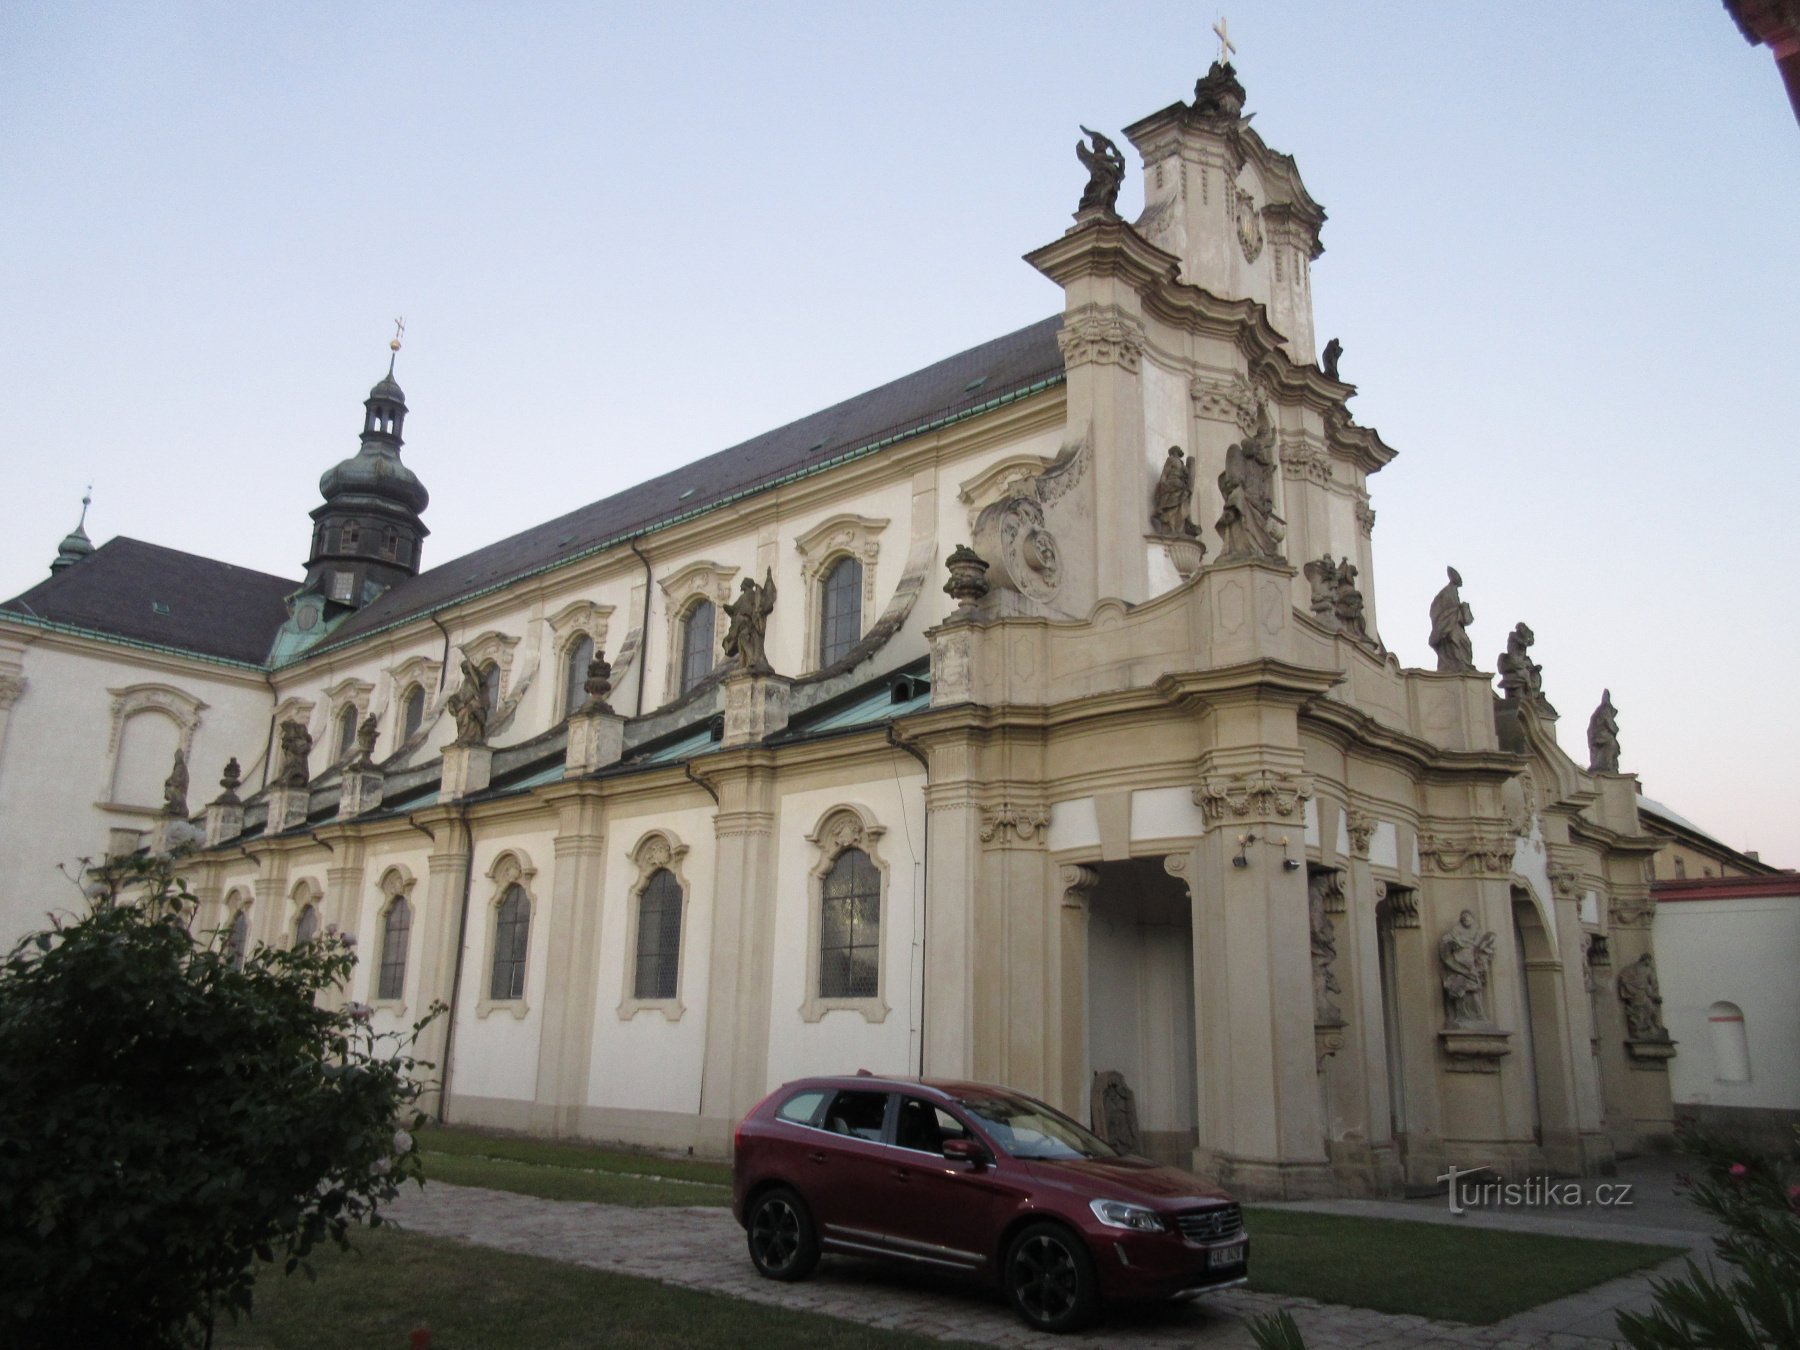 Monastery Church of the Assumption of the Virgin Mary in the evening